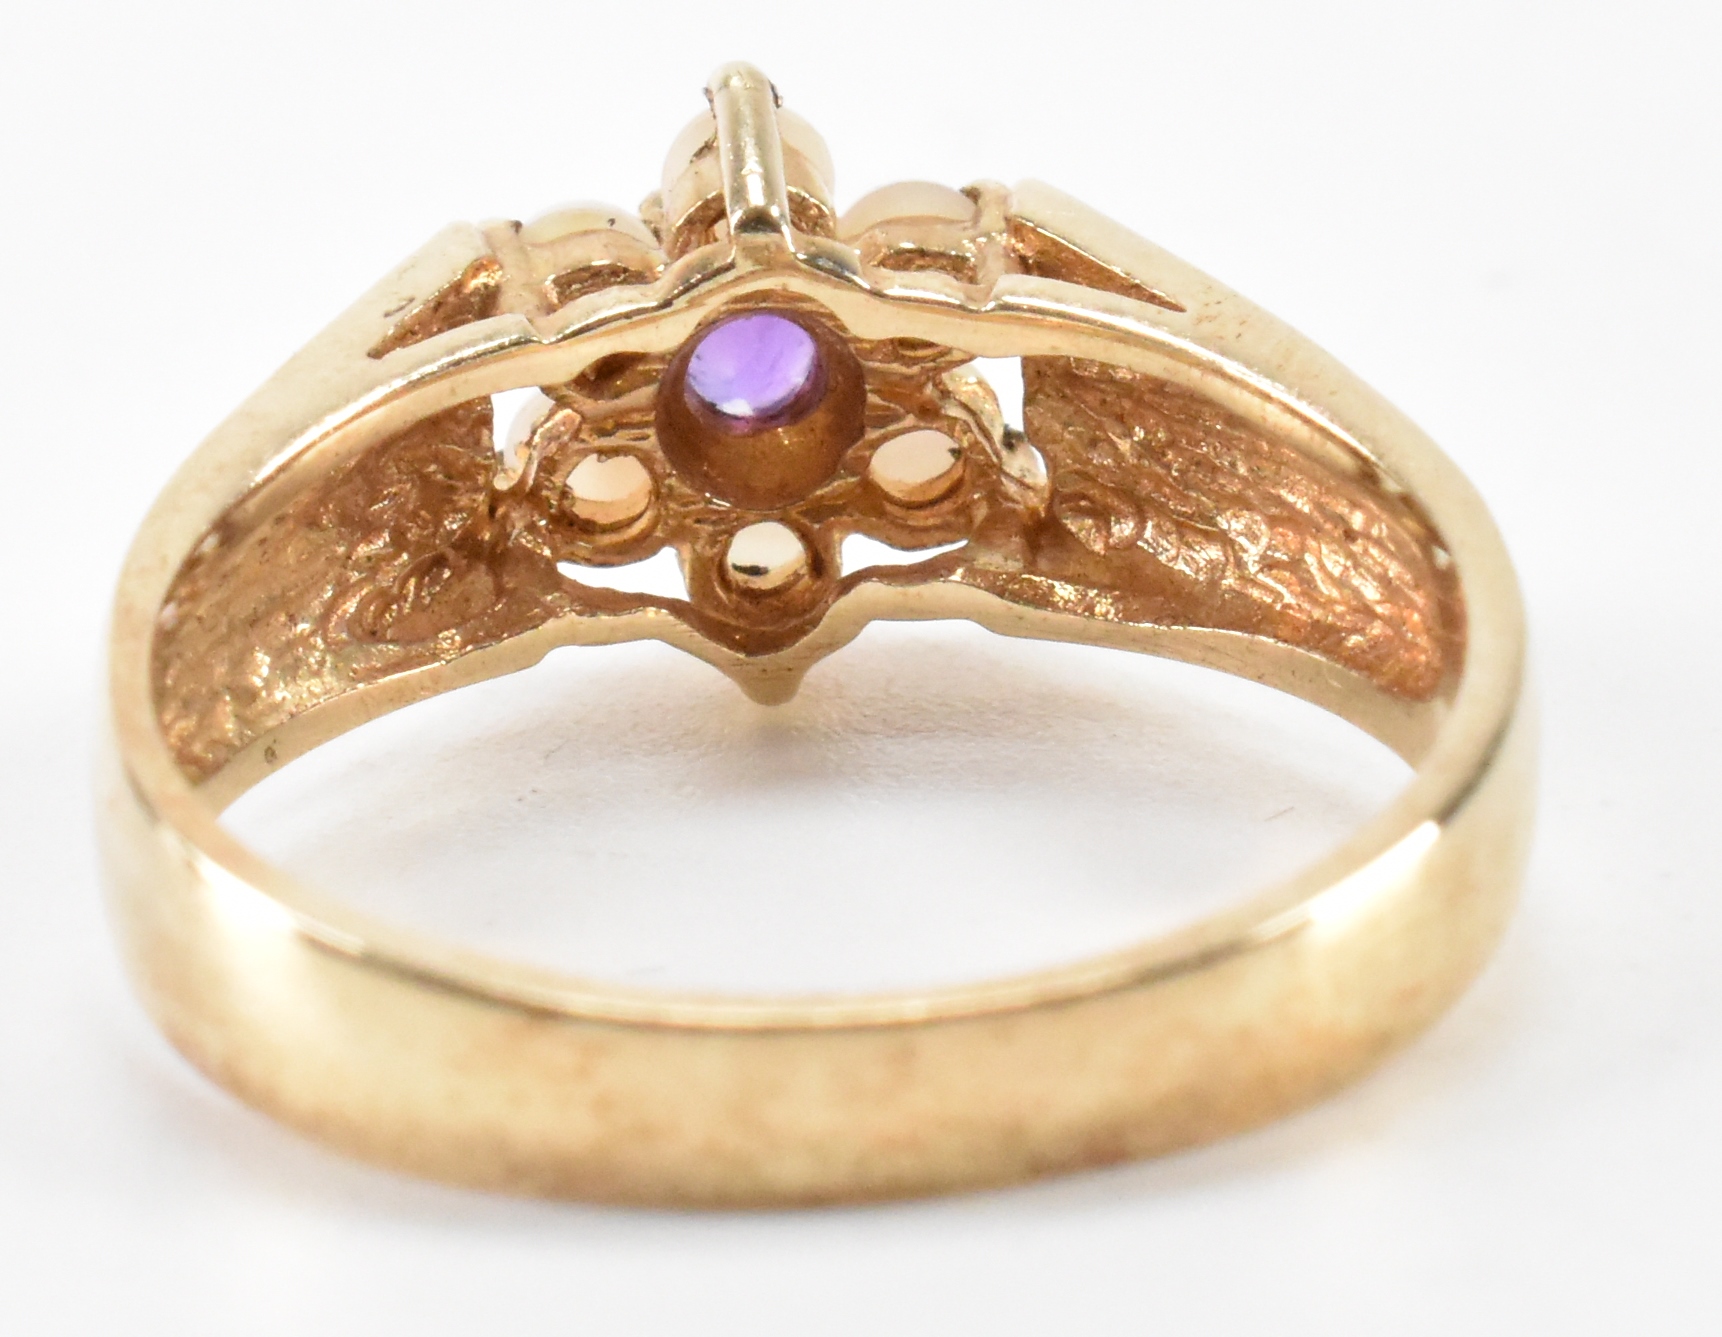 HALLMARKED 9CT GOLD AMETHYST & PEARL RING - Image 3 of 5